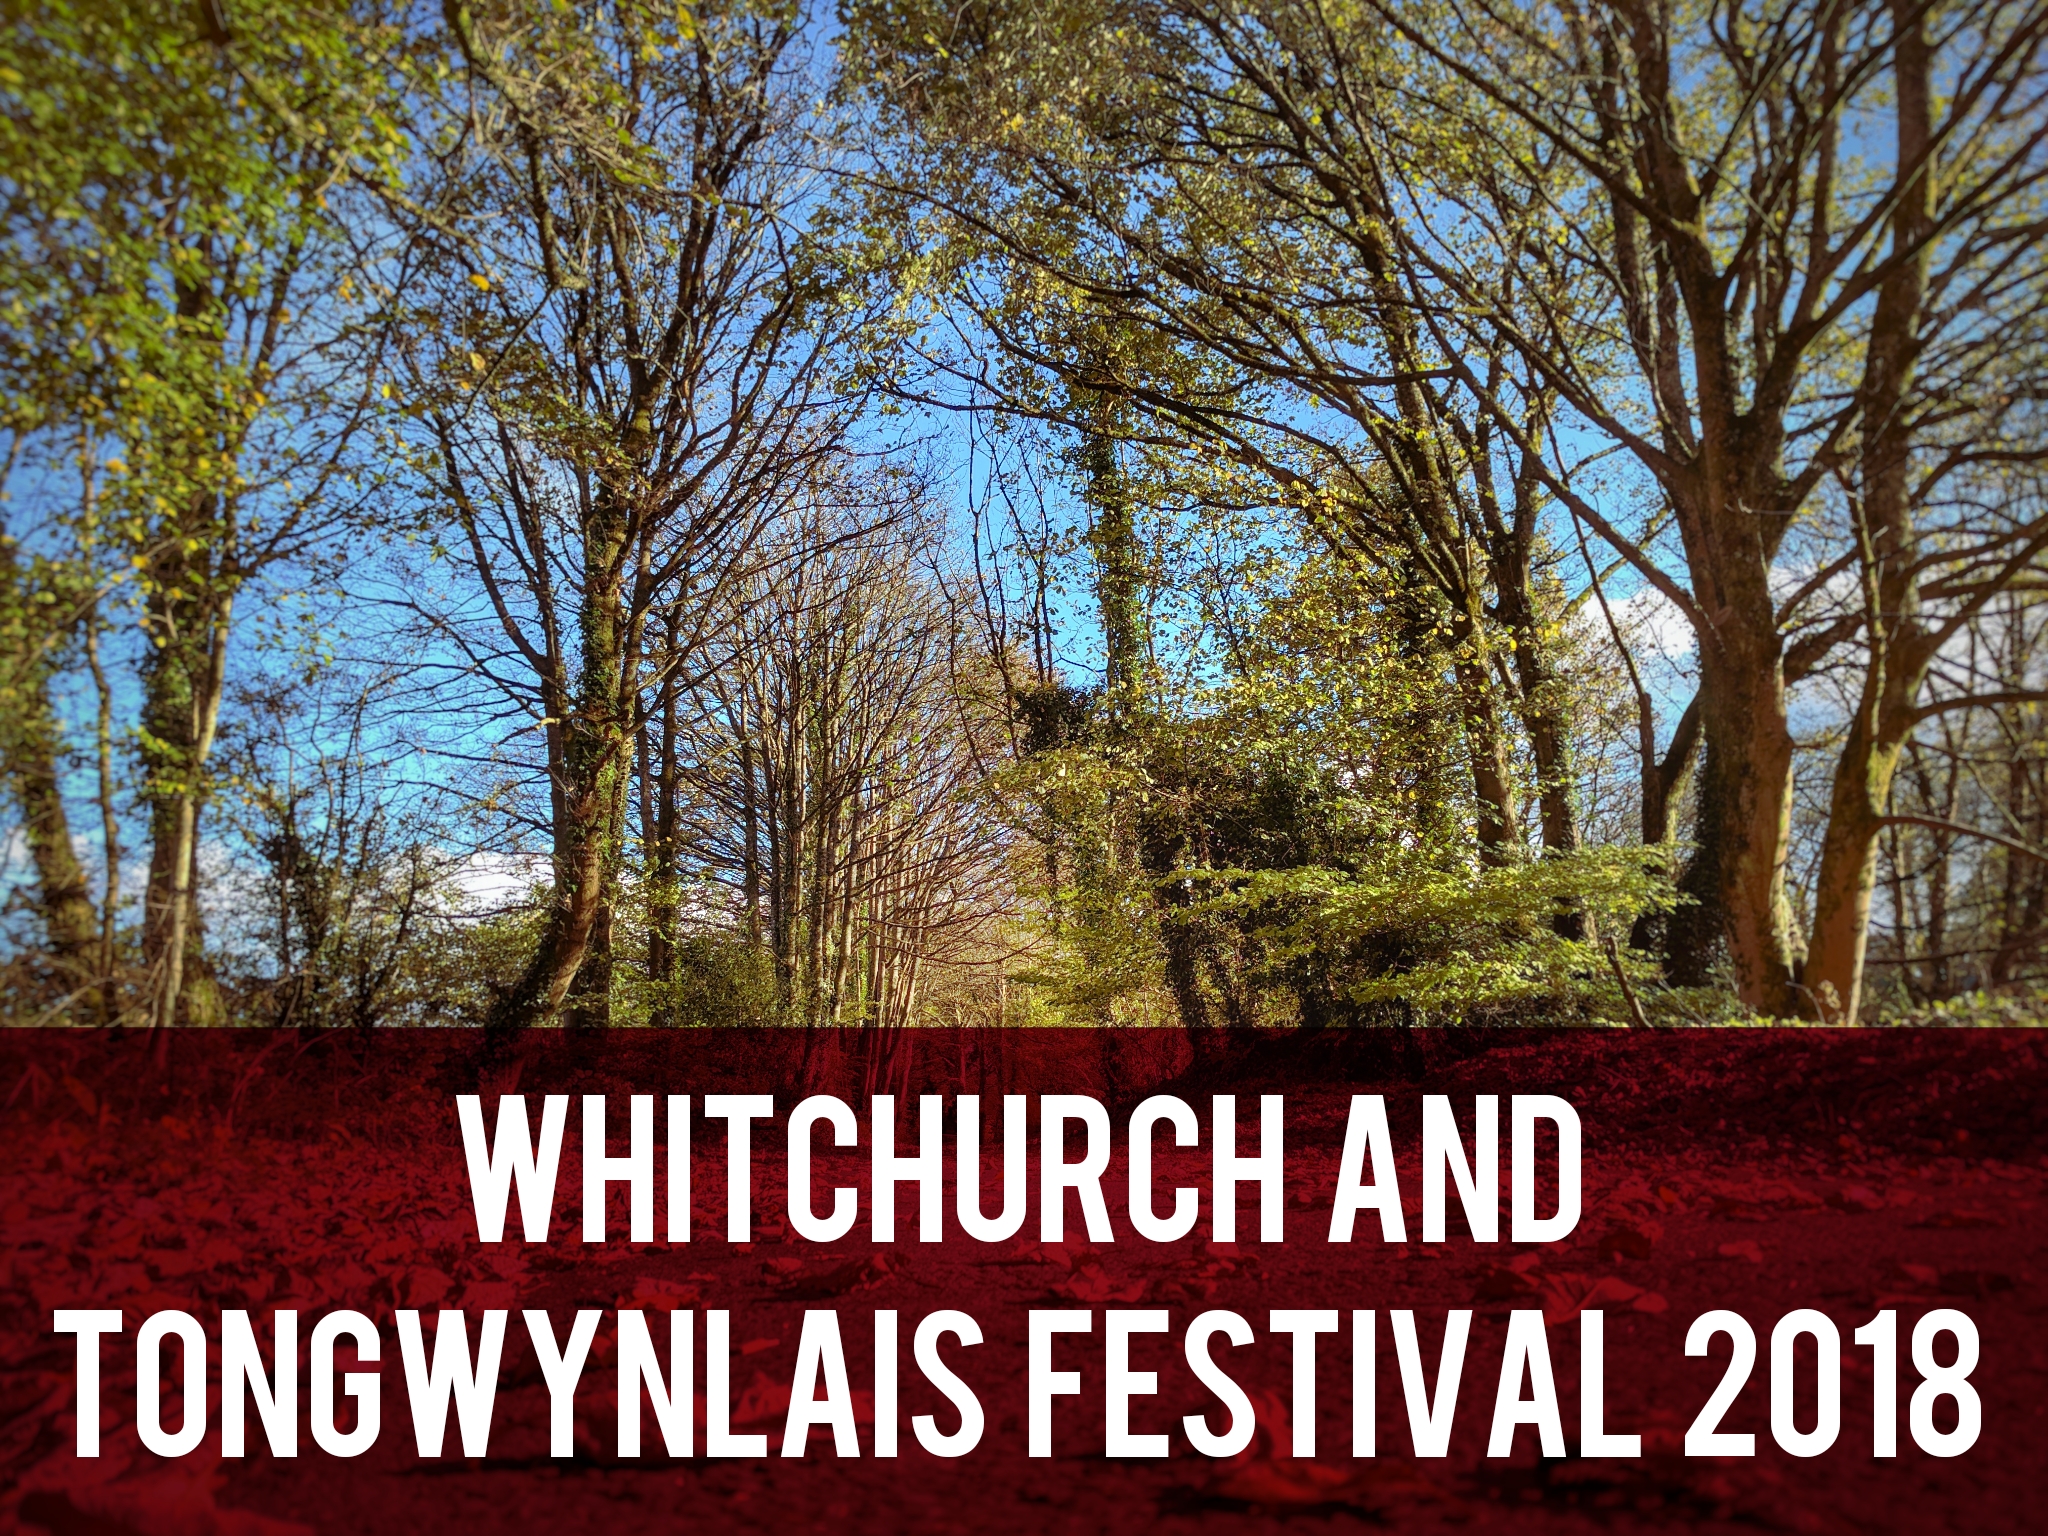 Whitchurch and Tongwynlais Festival 2018 header